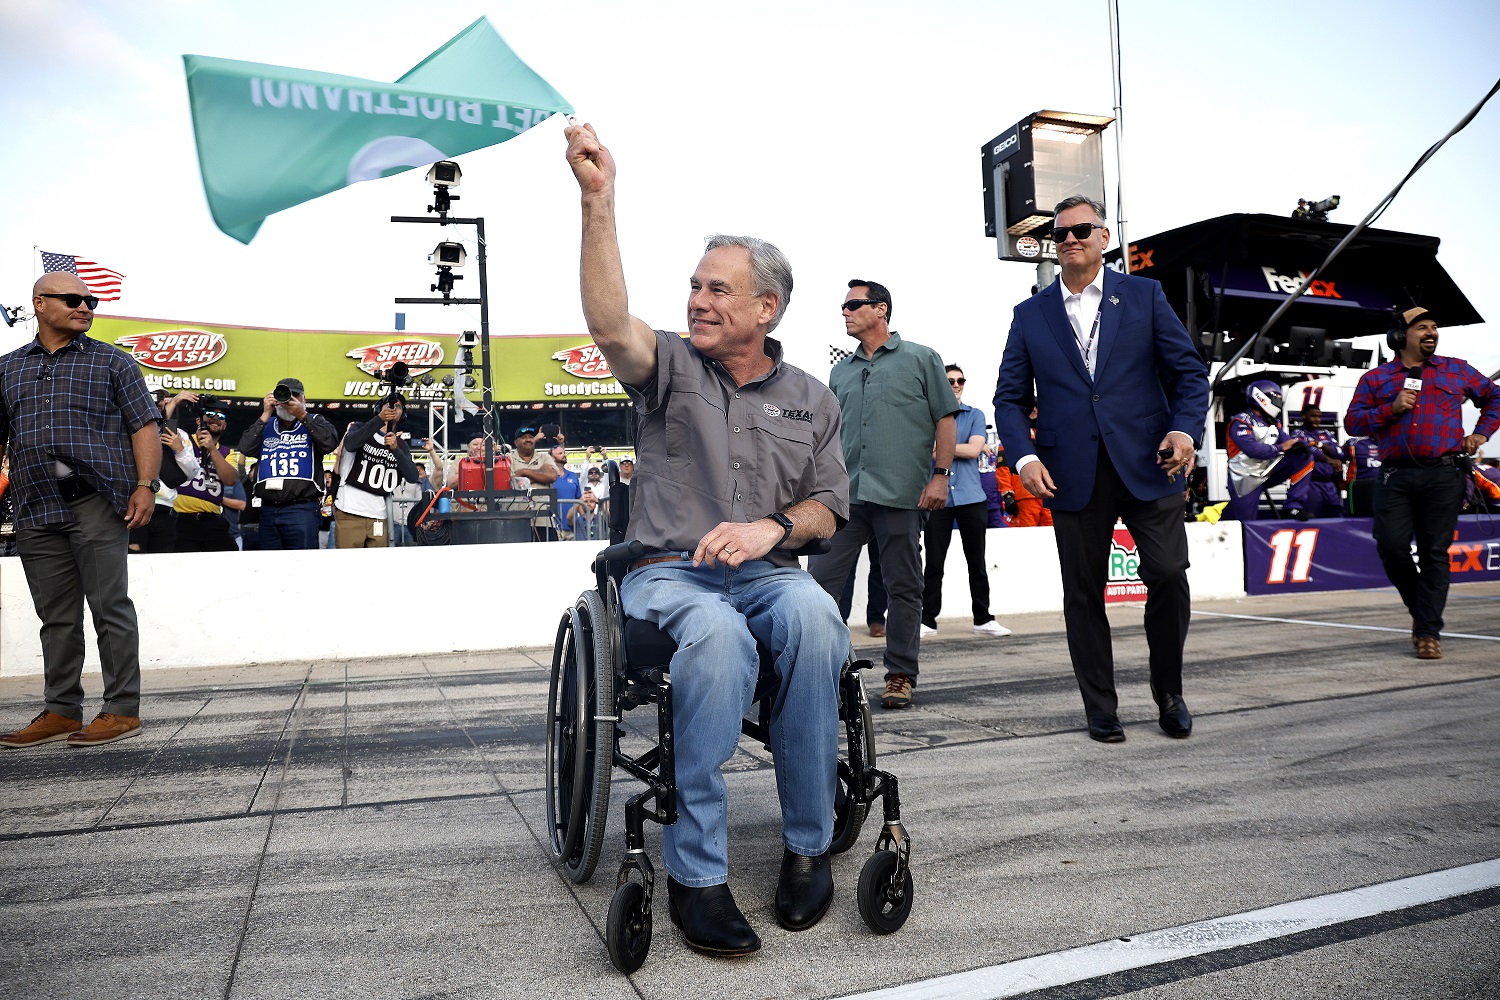 Texas Gov. Greg Abbott waves the green flag to start the NASCAR Cup Series All-Star Race at Texas Motor Speedway on May 22, 2022, in Fort Worth, Texas. | Chris Graythen/Getty Images